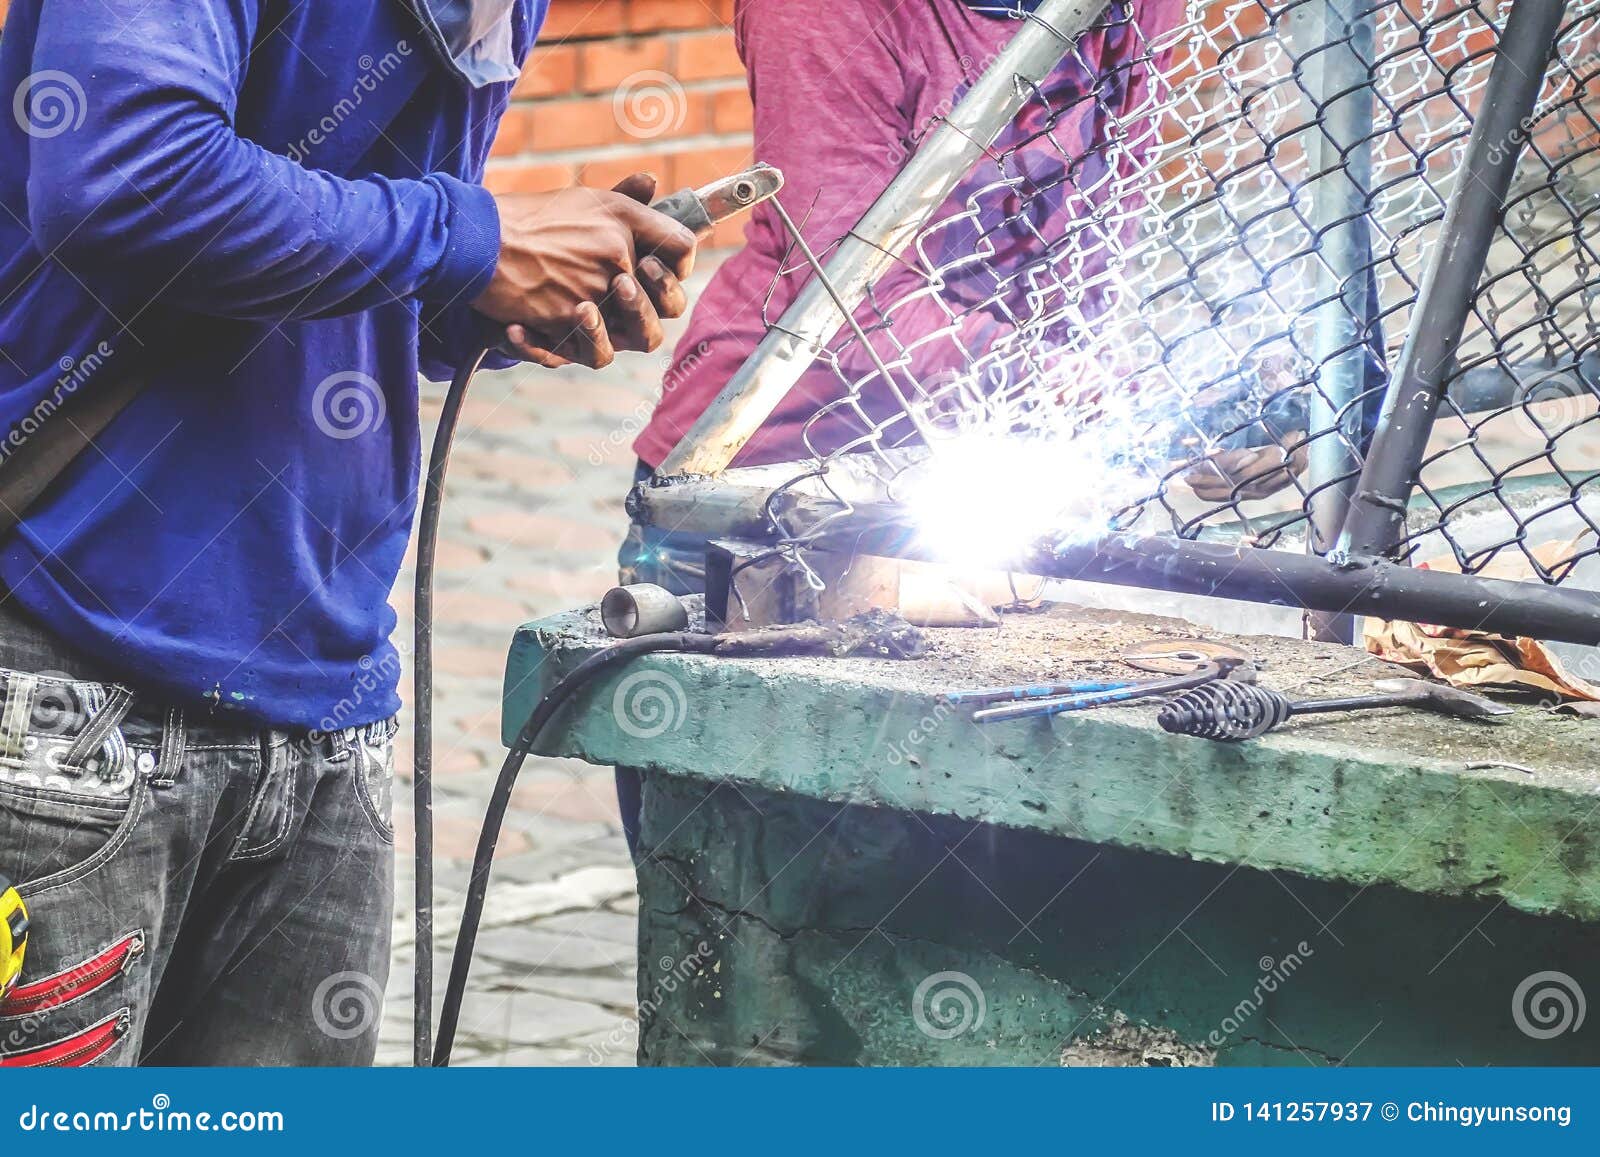 strong man is a welder in a blue t-shirt,and welders leathers, a metal product is welded with a welding machine in the outdoor